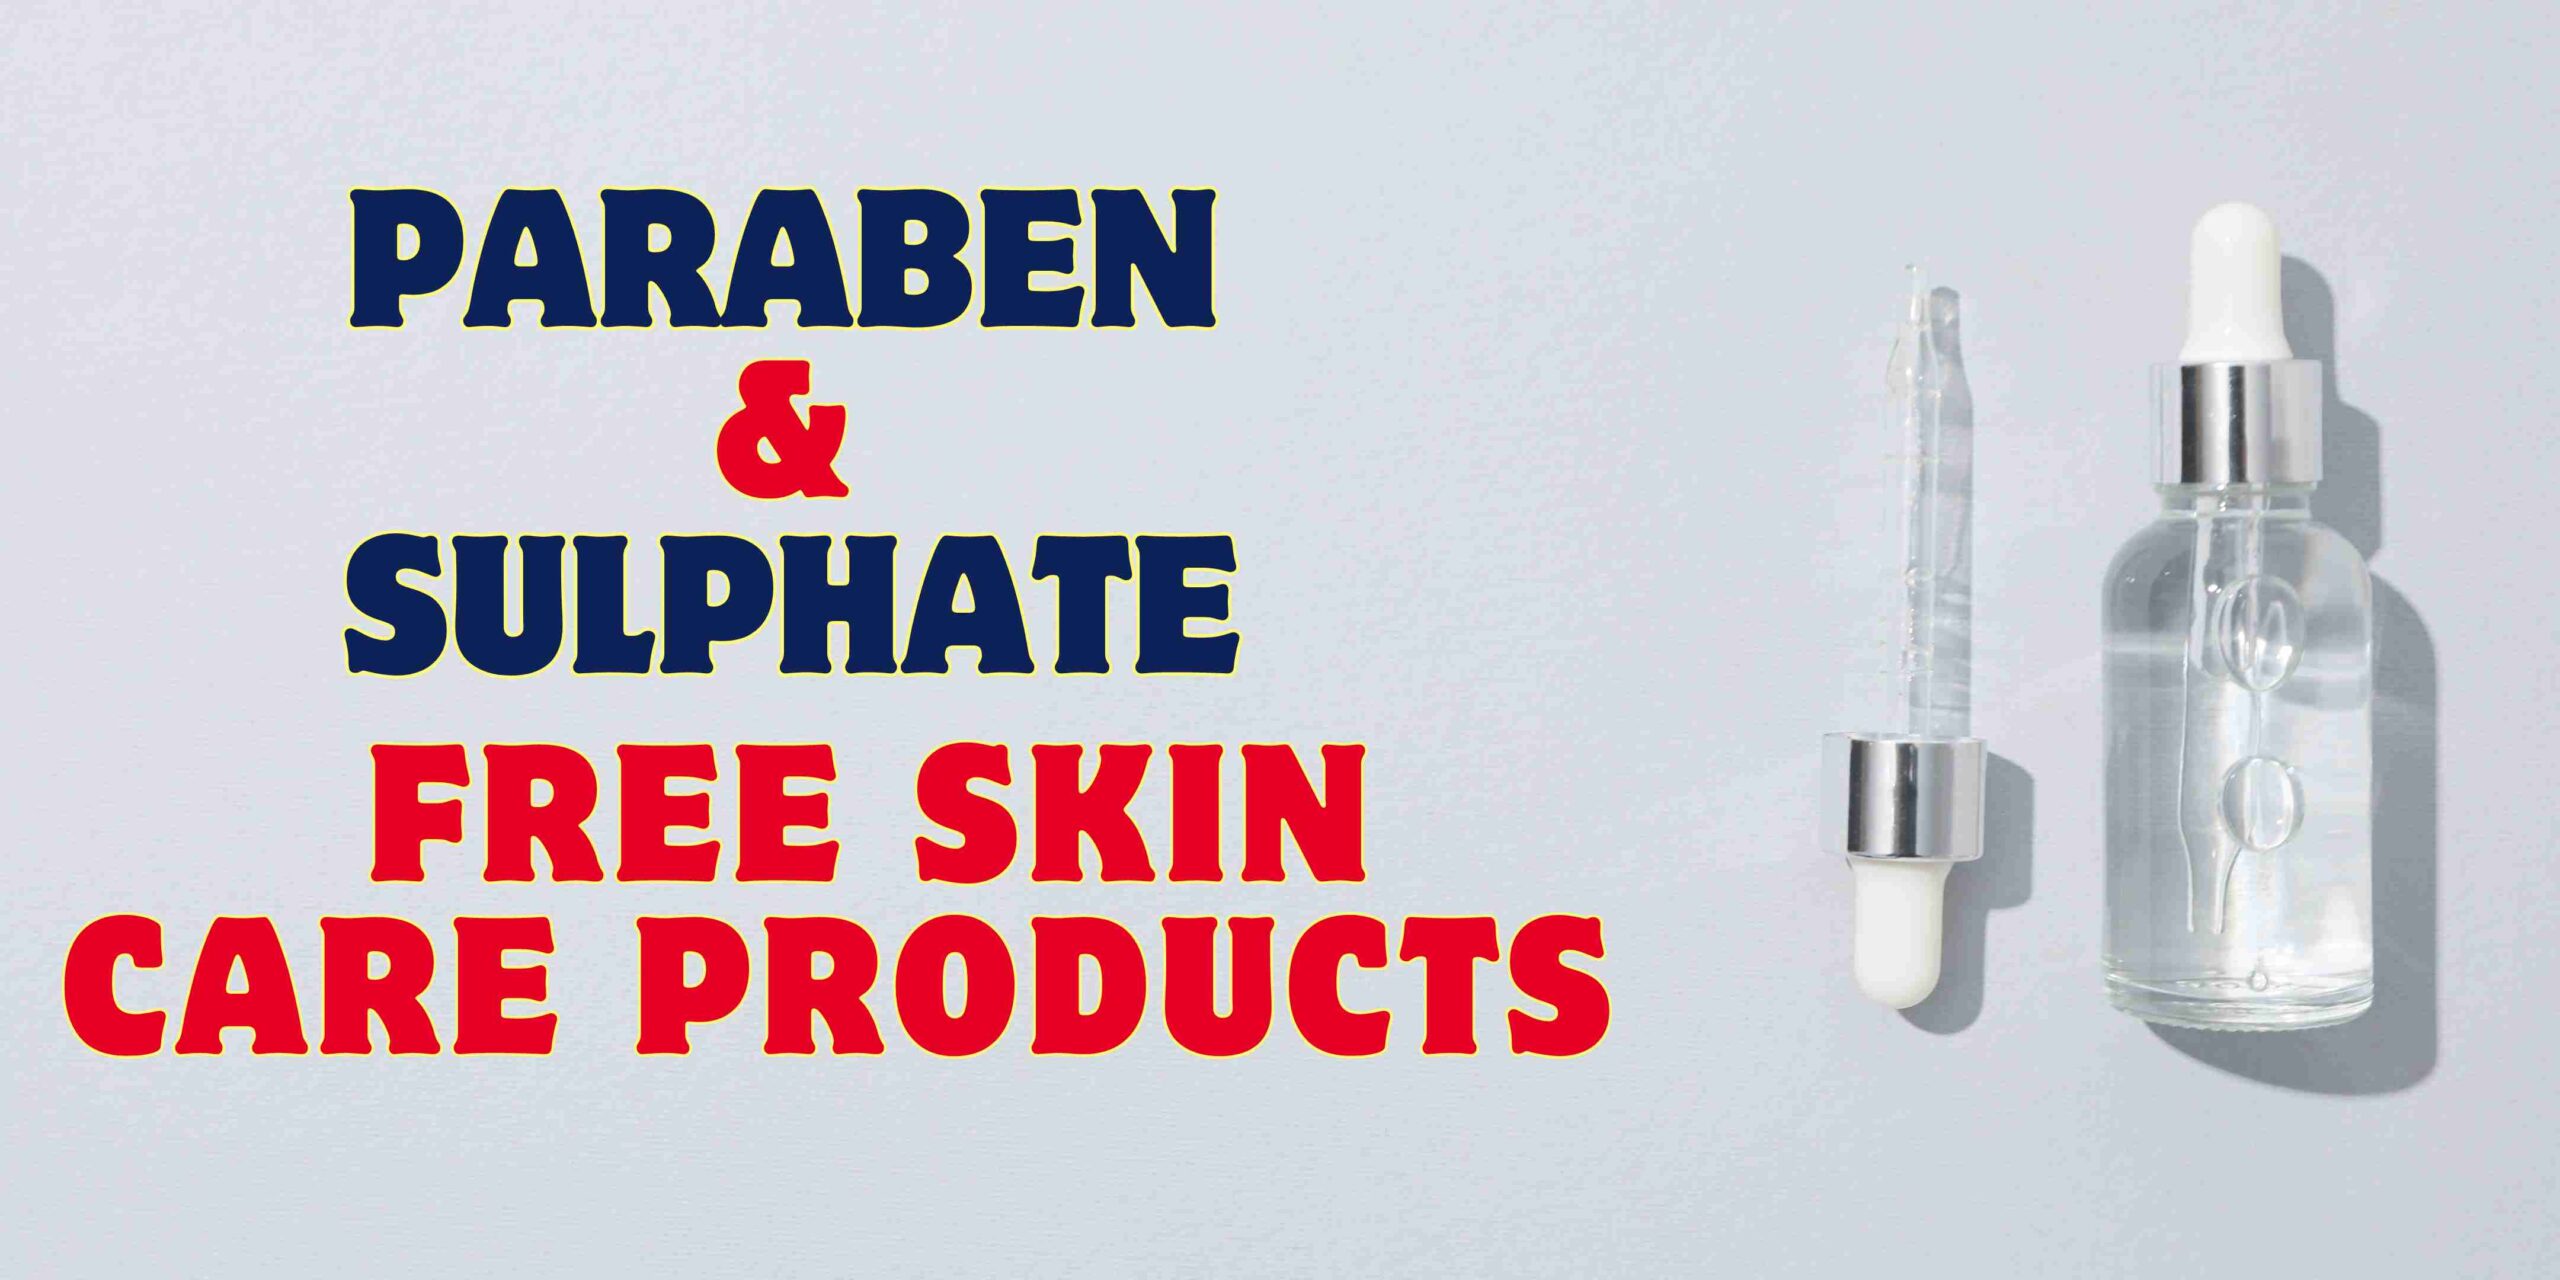 Paraben & Sulphate Free Products